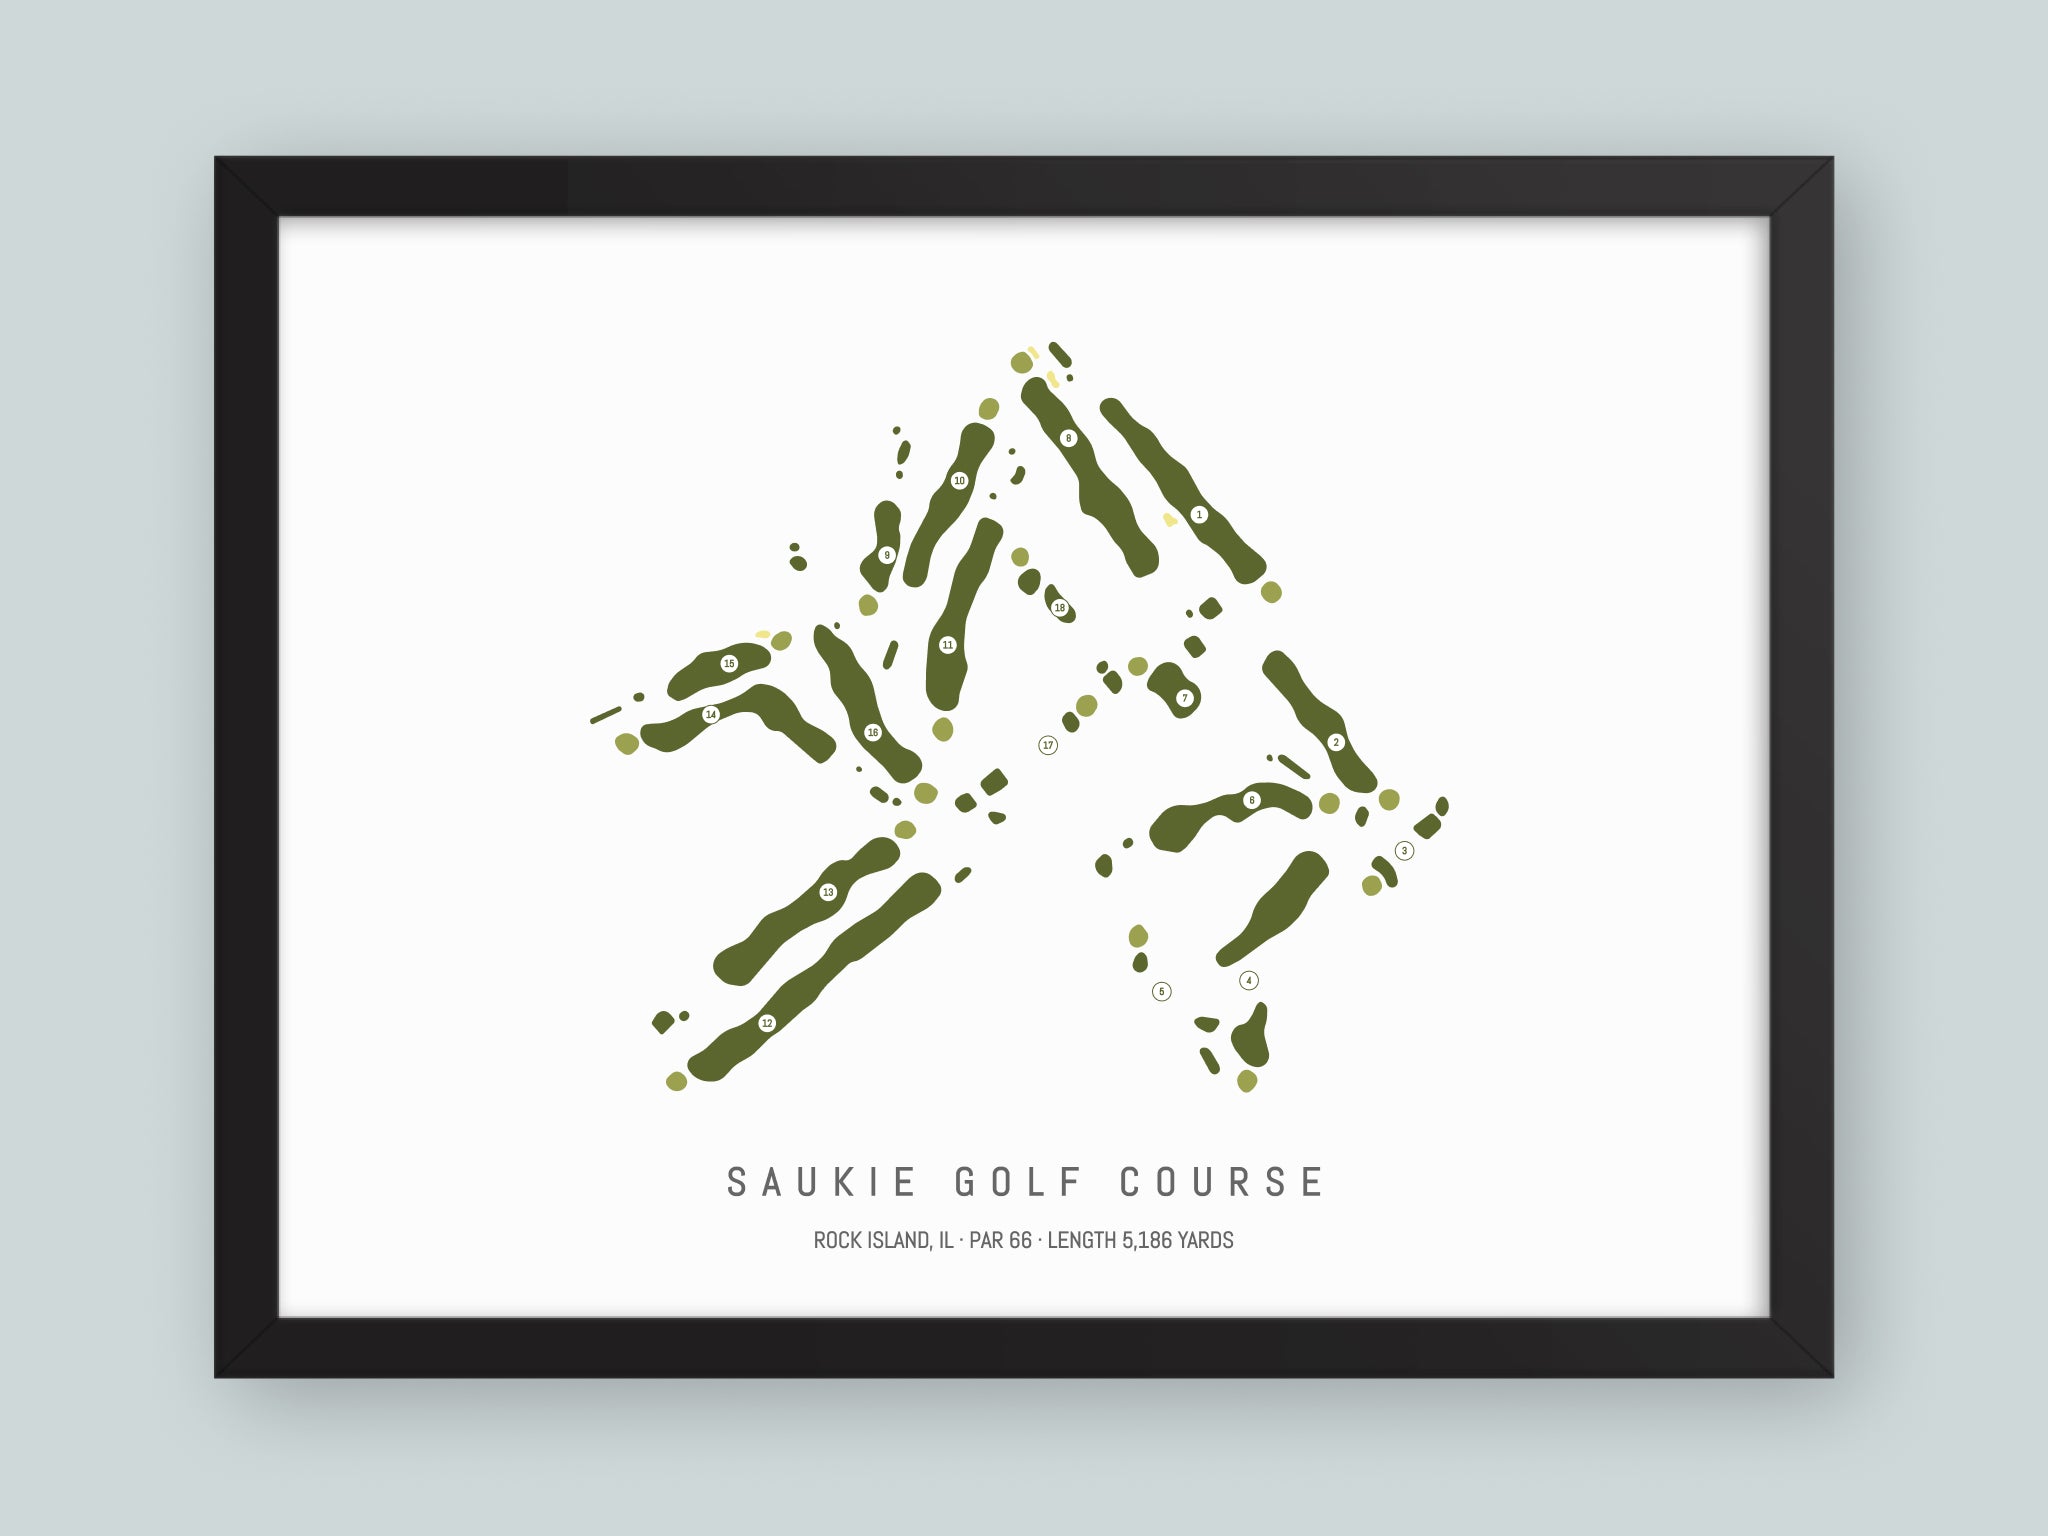 Saukie-Golf-Course-IL--Black-Frame-24x18-With-Hole-Numbers